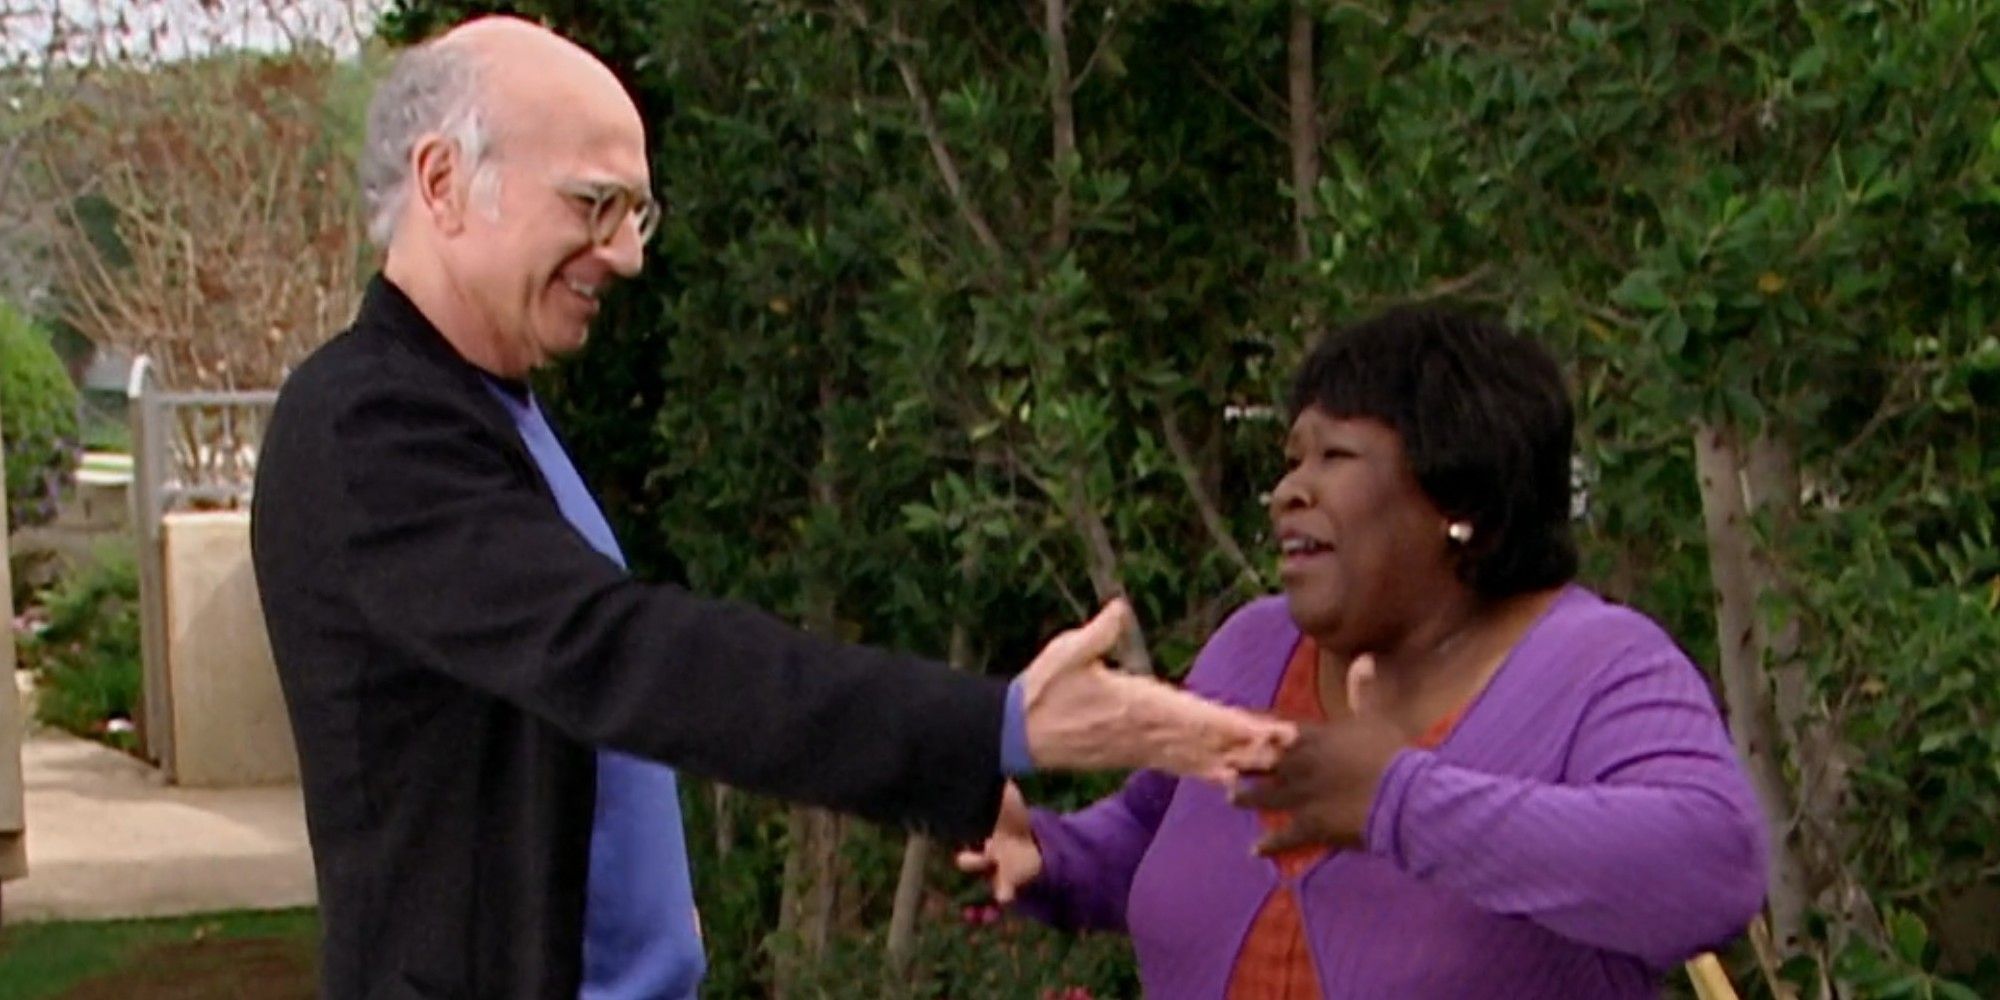 Larry and Auntie Rae about to hug in Curb Your Enthusiasm season 6